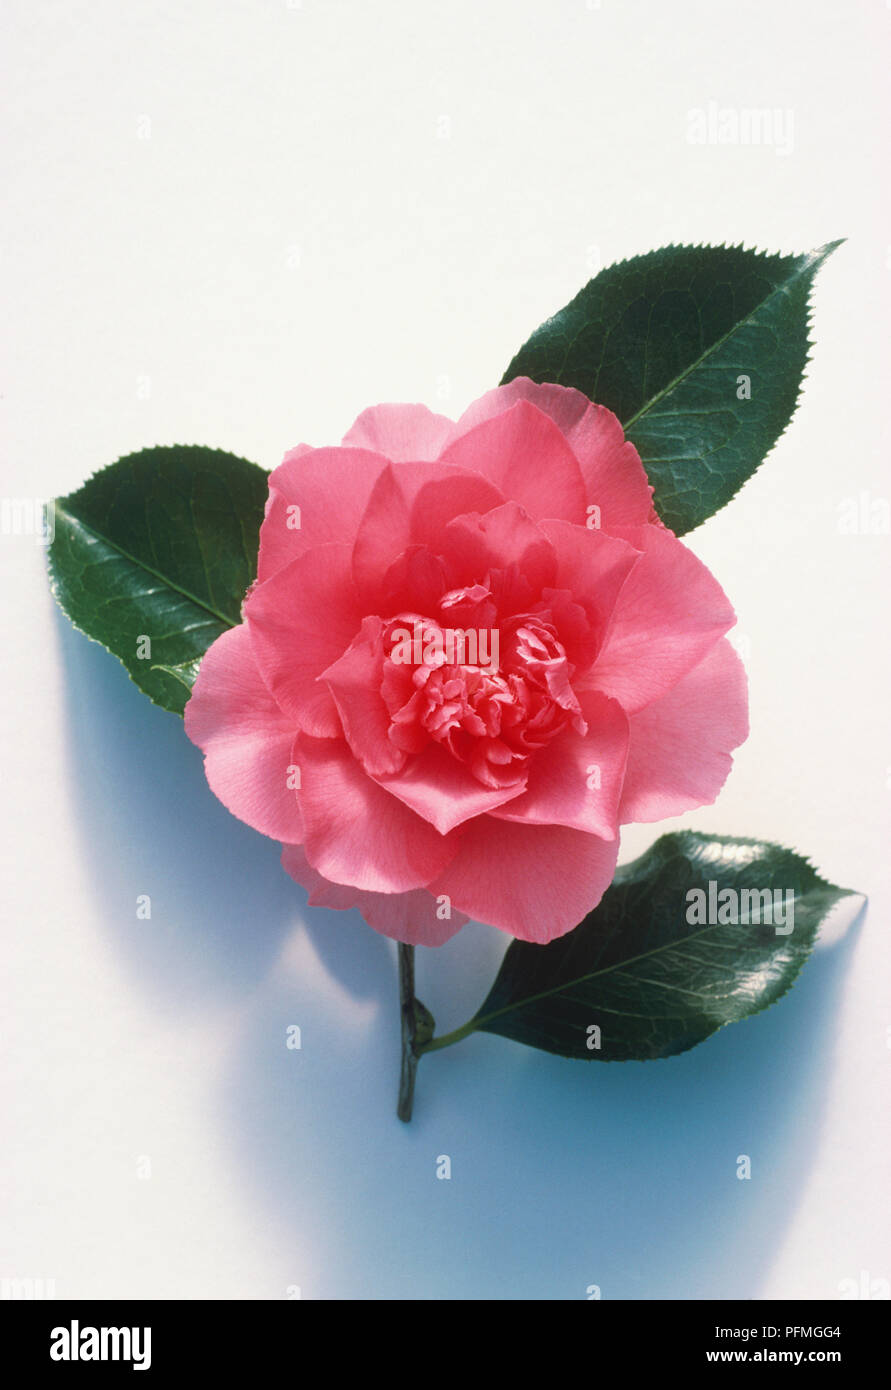 Camellia japonica 'Elegans Supreme', pink flower and glossy green leaves Stock Photo